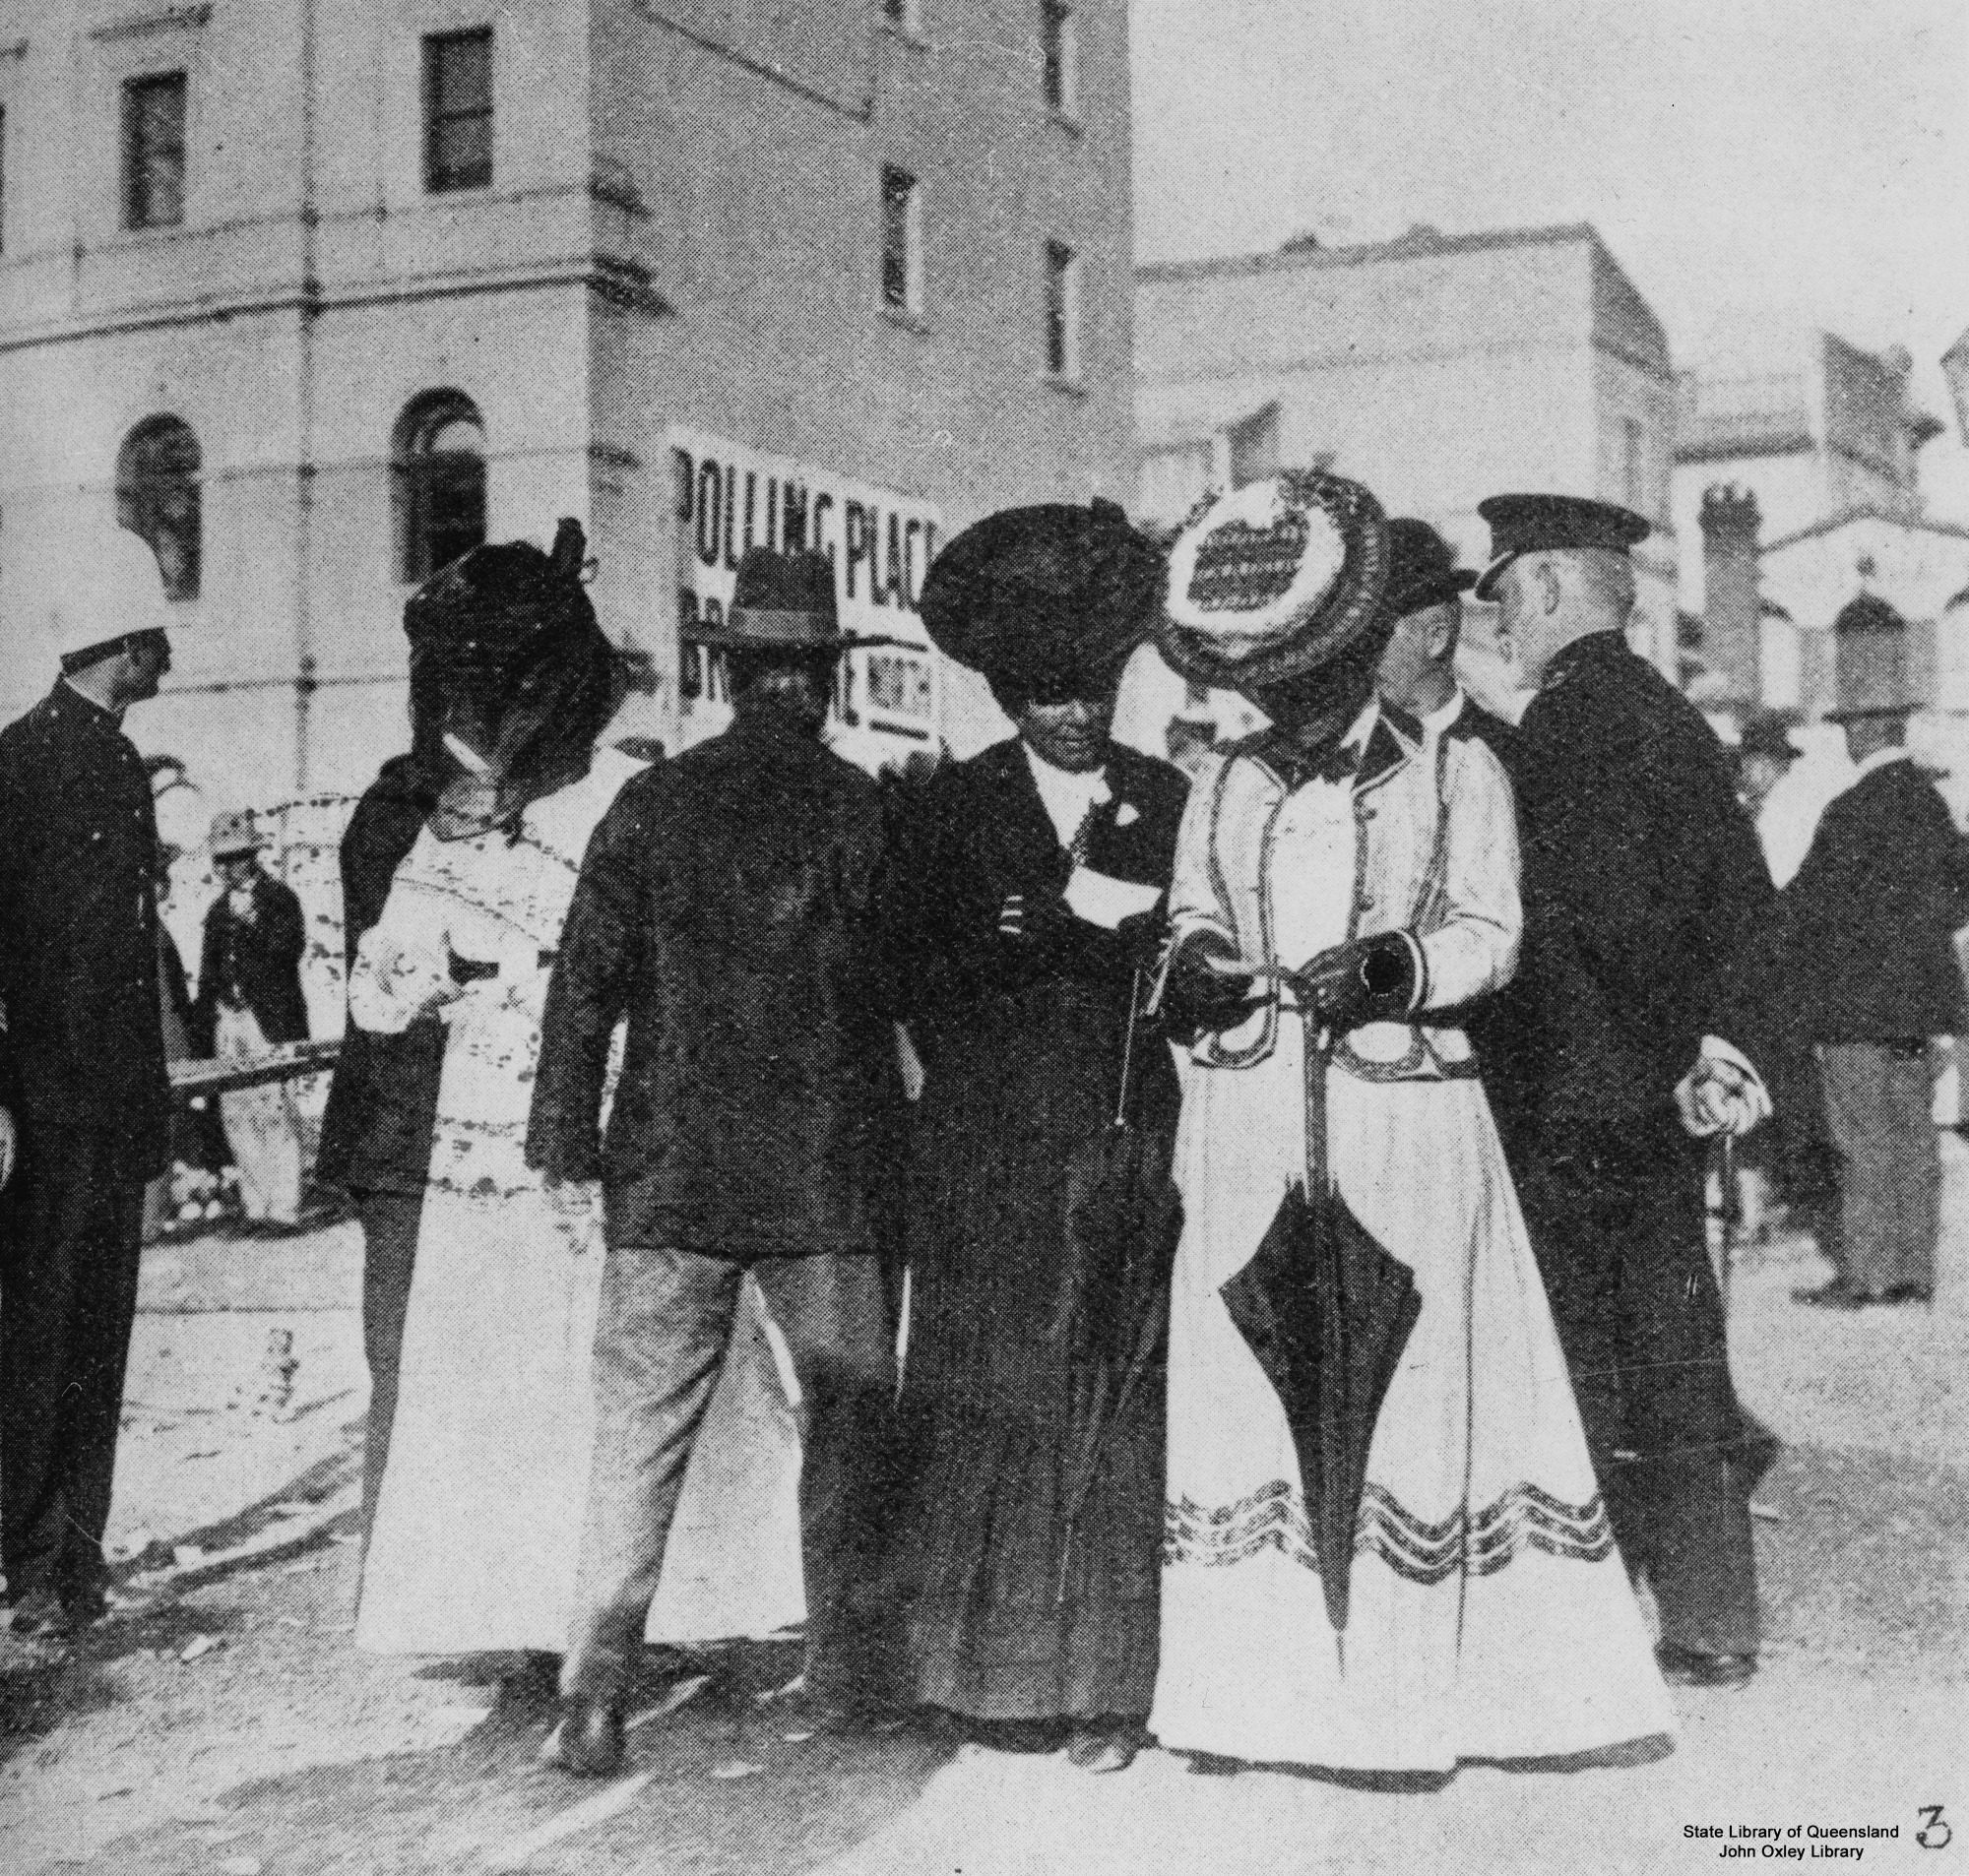 Adelaide Polling booth 1907